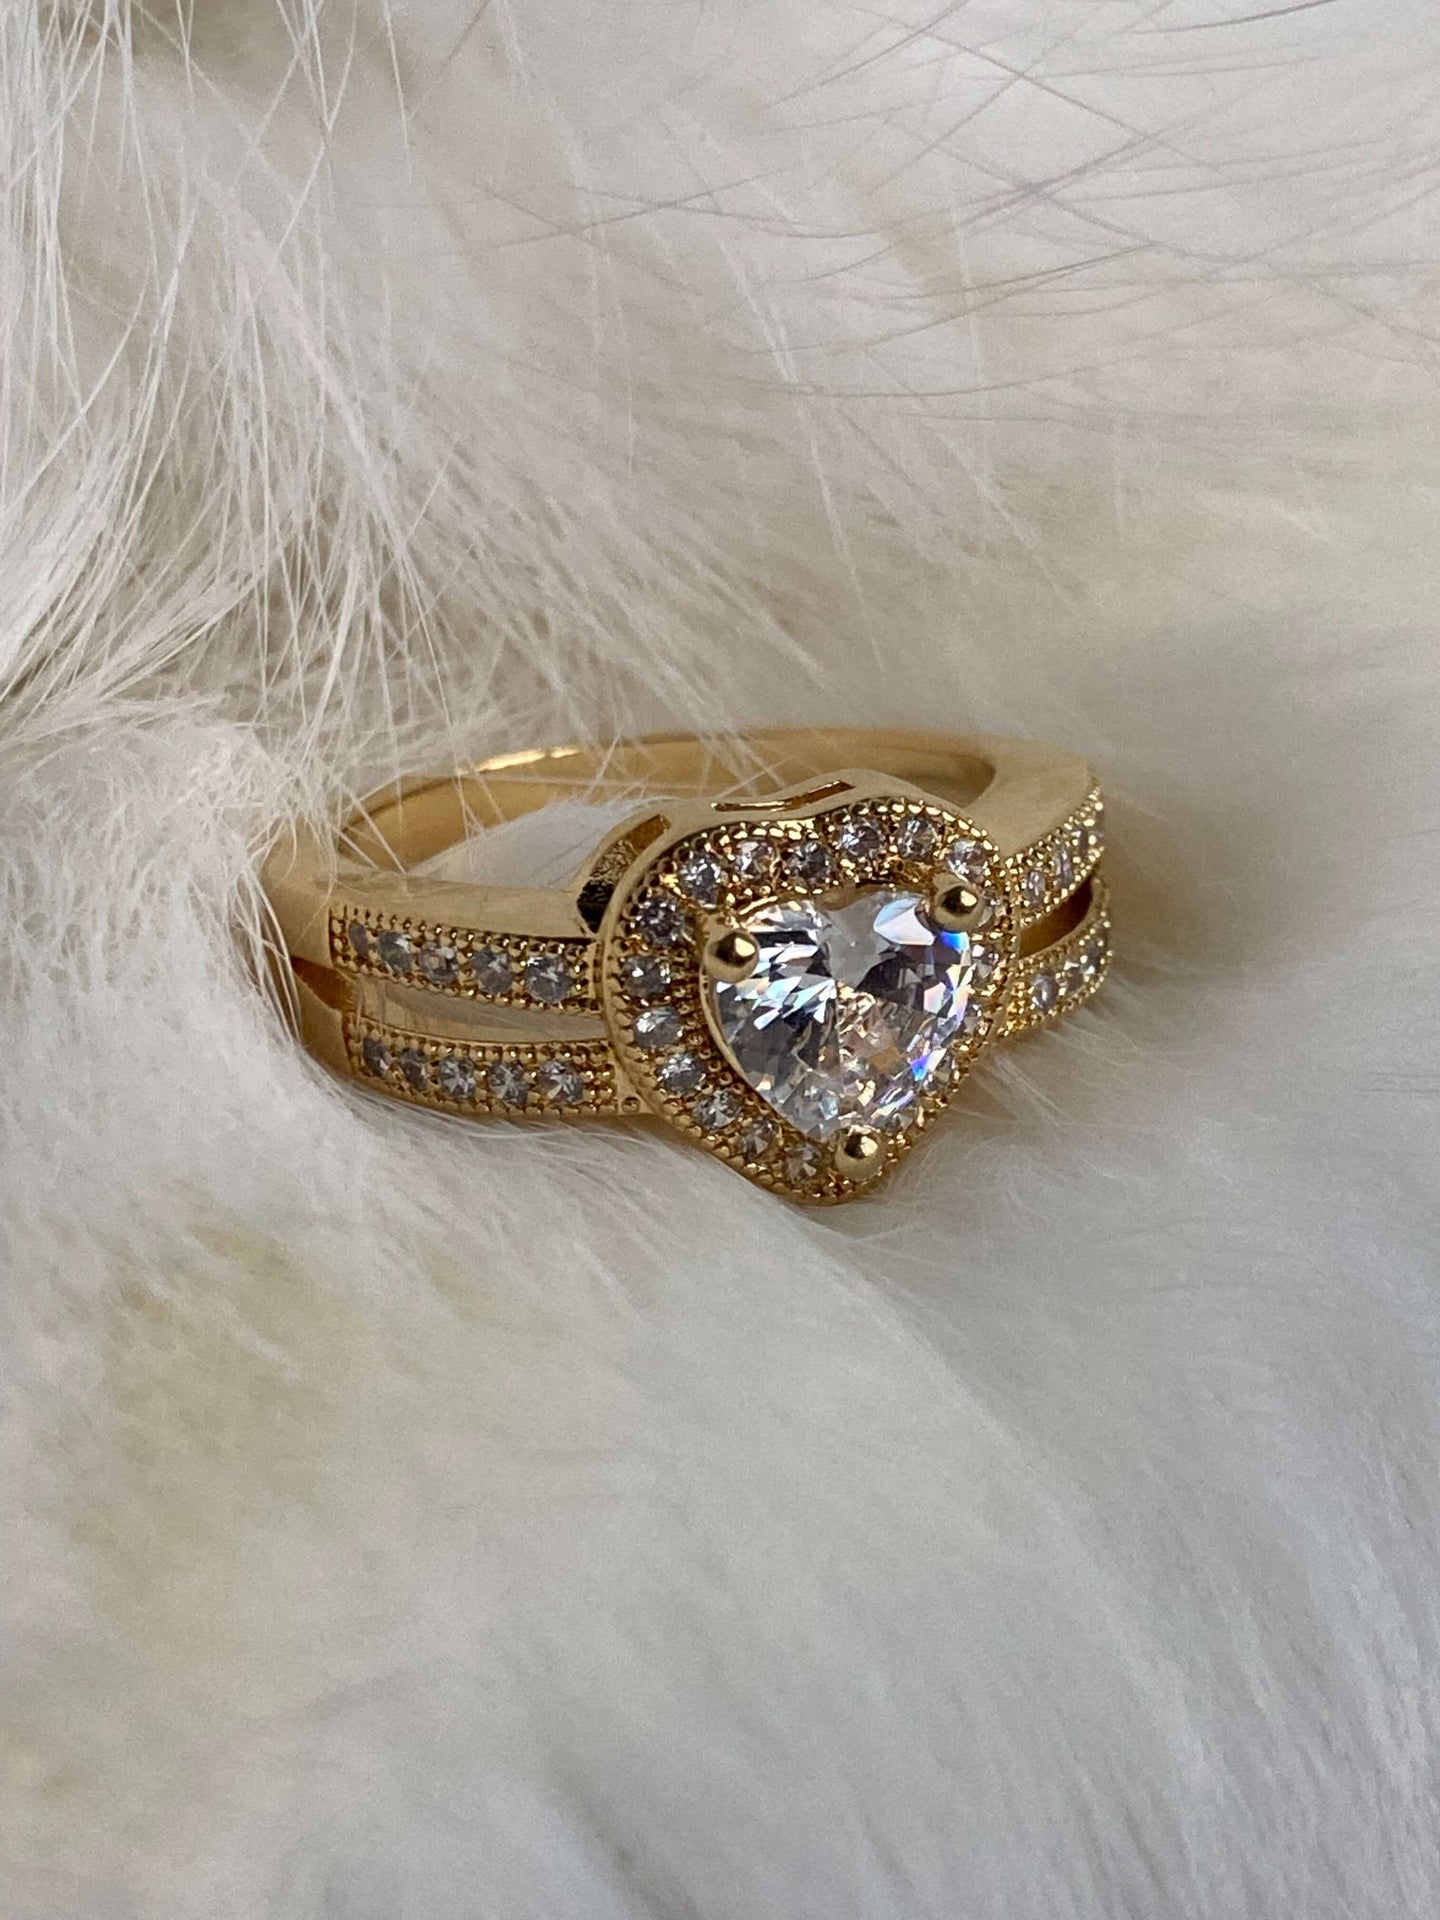 heart jewelry, heart ring, heart ring gold, heart ring gold jewelry, heart shaped gold ring, heart shaped gold ring, gold heart ring with diamond, stacking rings gold, layering rings gold, Vanessa Mooney MOLLY HEART RING, Vanessa Mooney heart ring